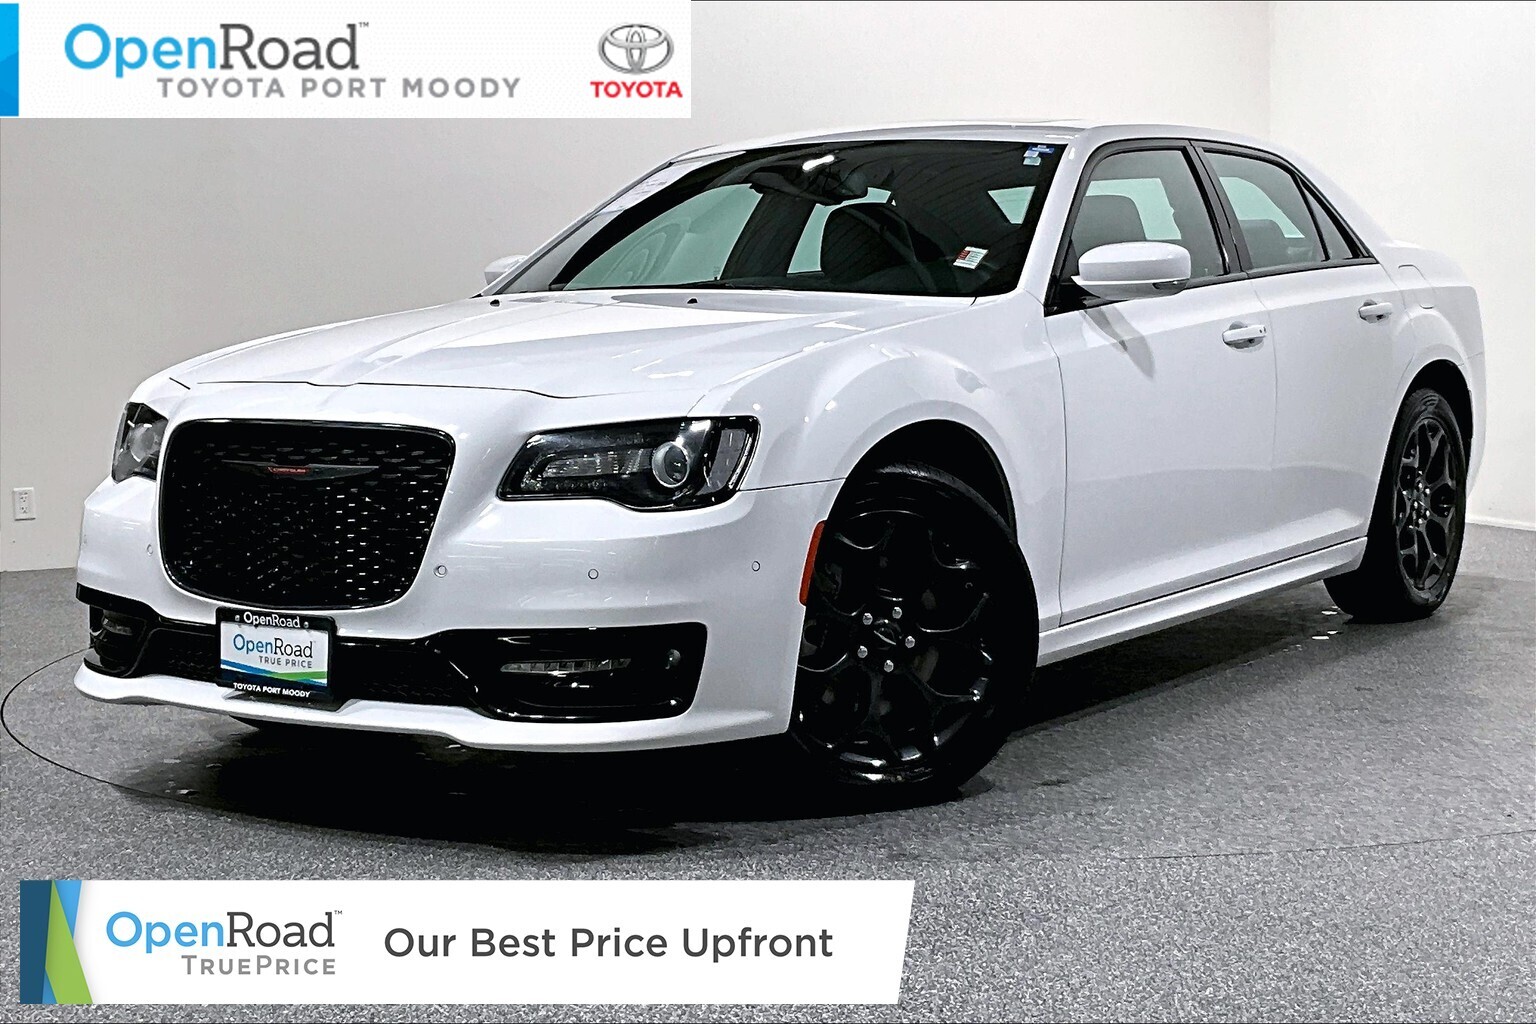 2022 Chrysler 300 S 300s AWD |OpenRoad True Price |One Owner |No Cla